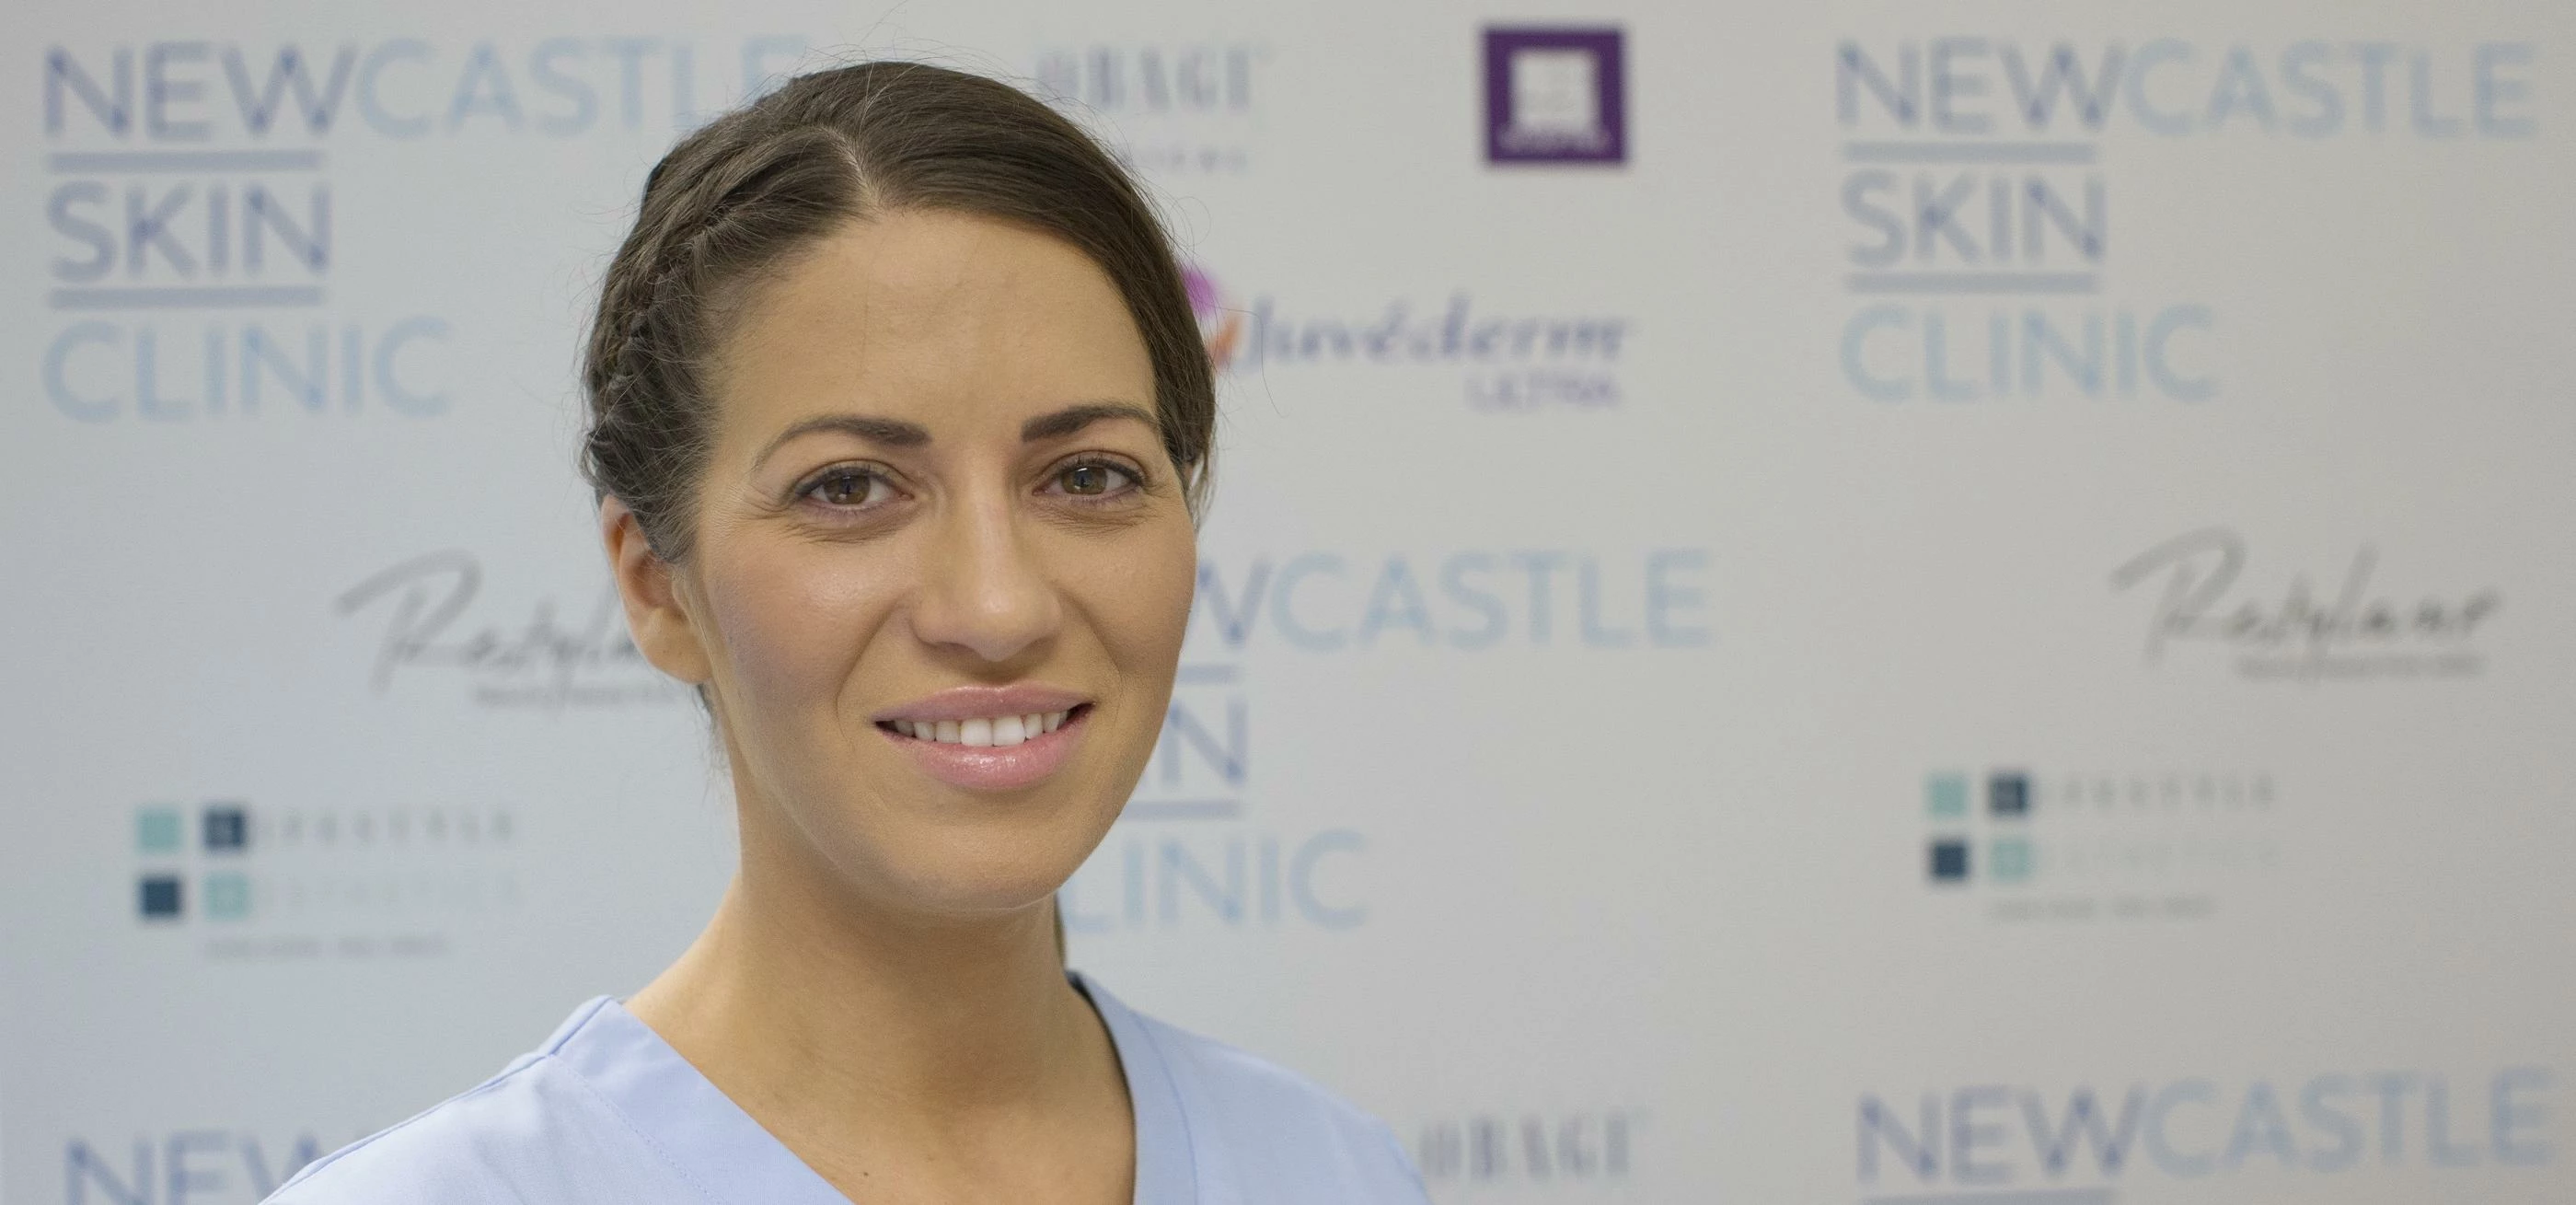 Luisa Scott Founder and Clinical Director of Newcastle Skin Clinic